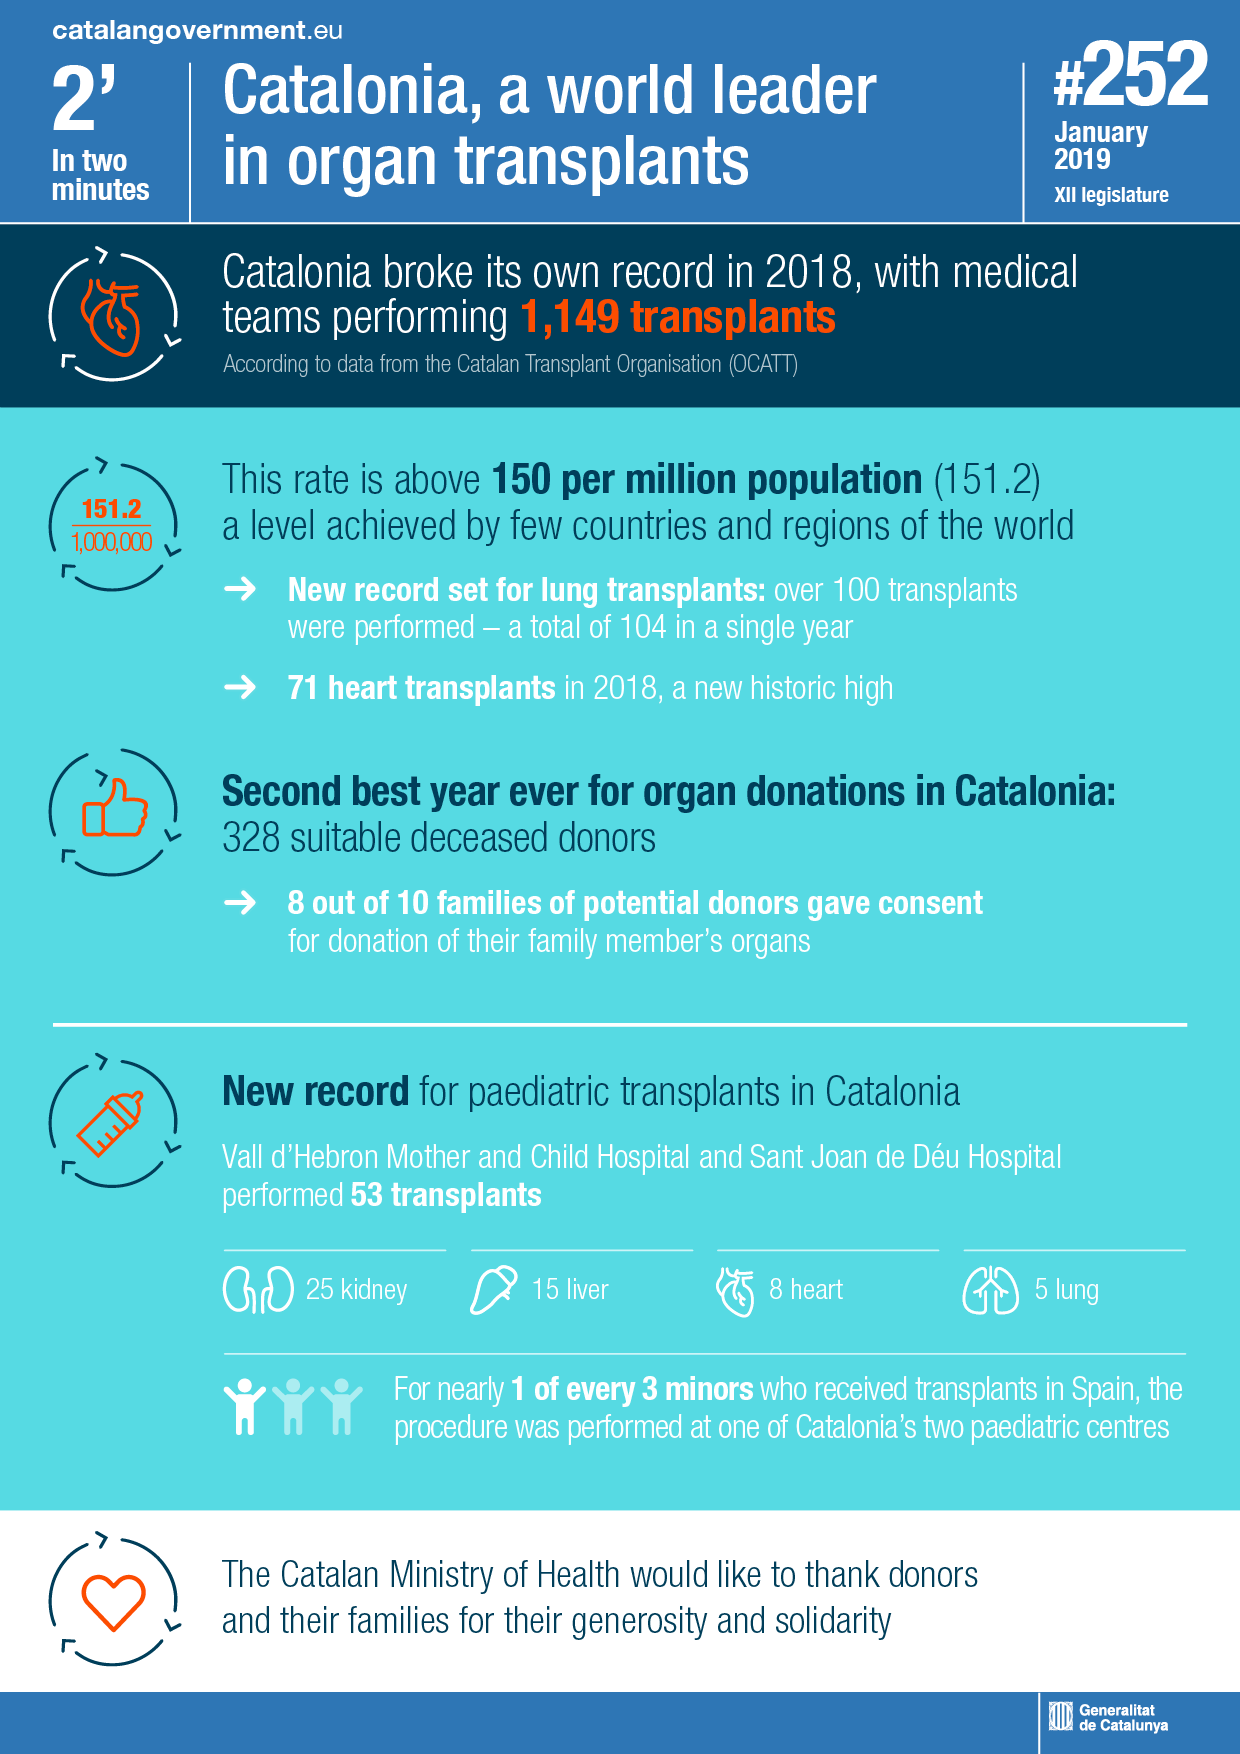 Catalonia broke its own record in 2018, with medical teams performing 1,149 transplants